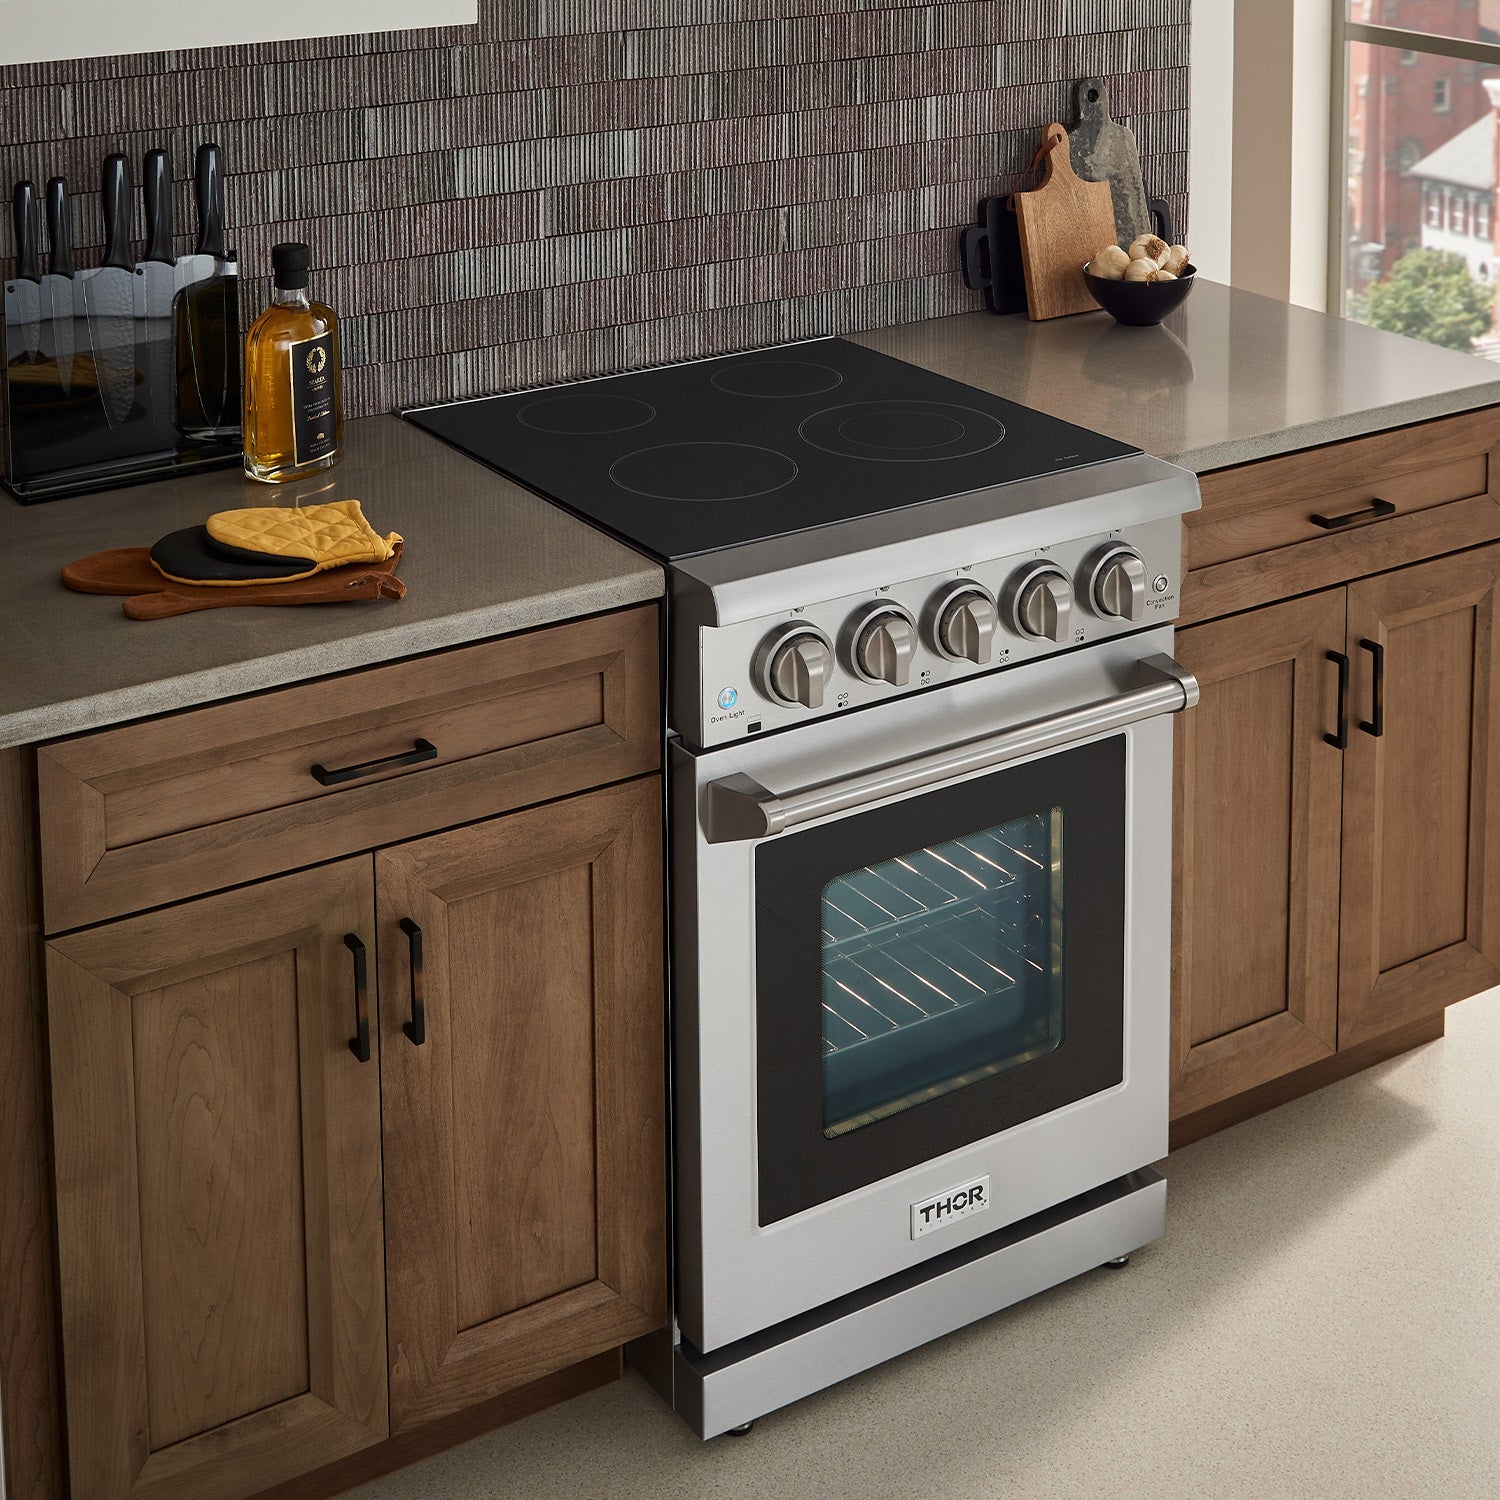 Thor 24 Inch 3.73 cu. ft. Professional Electric Range In Stainless Steel,  HRE2401